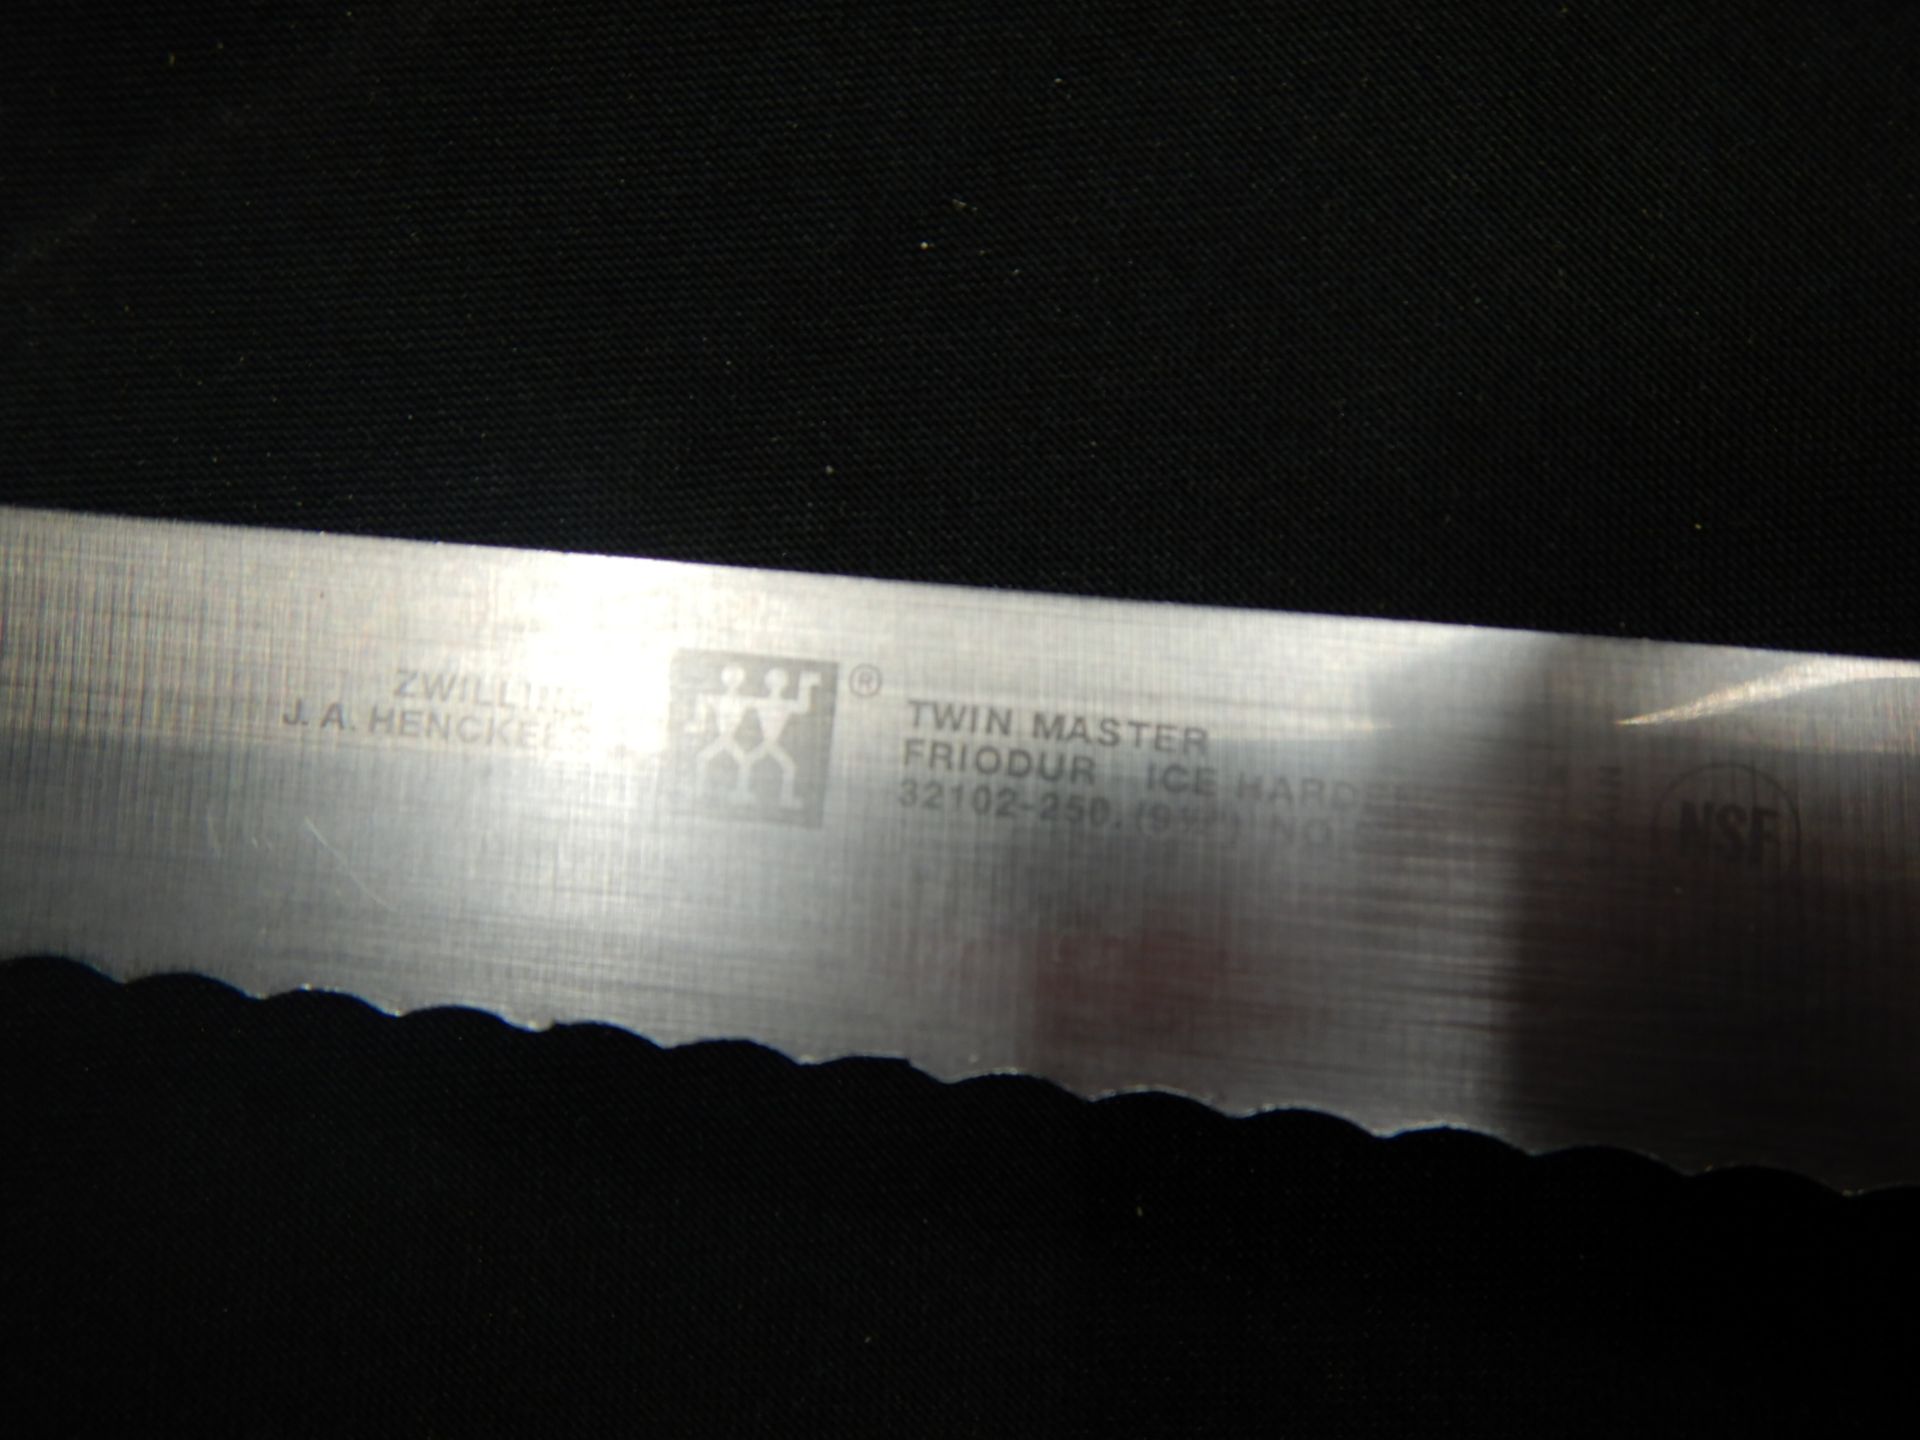 4-ZWILLING J.A. HENCKELS TWIN MASTER ICE HARDENED KNIVES - Image 2 of 4